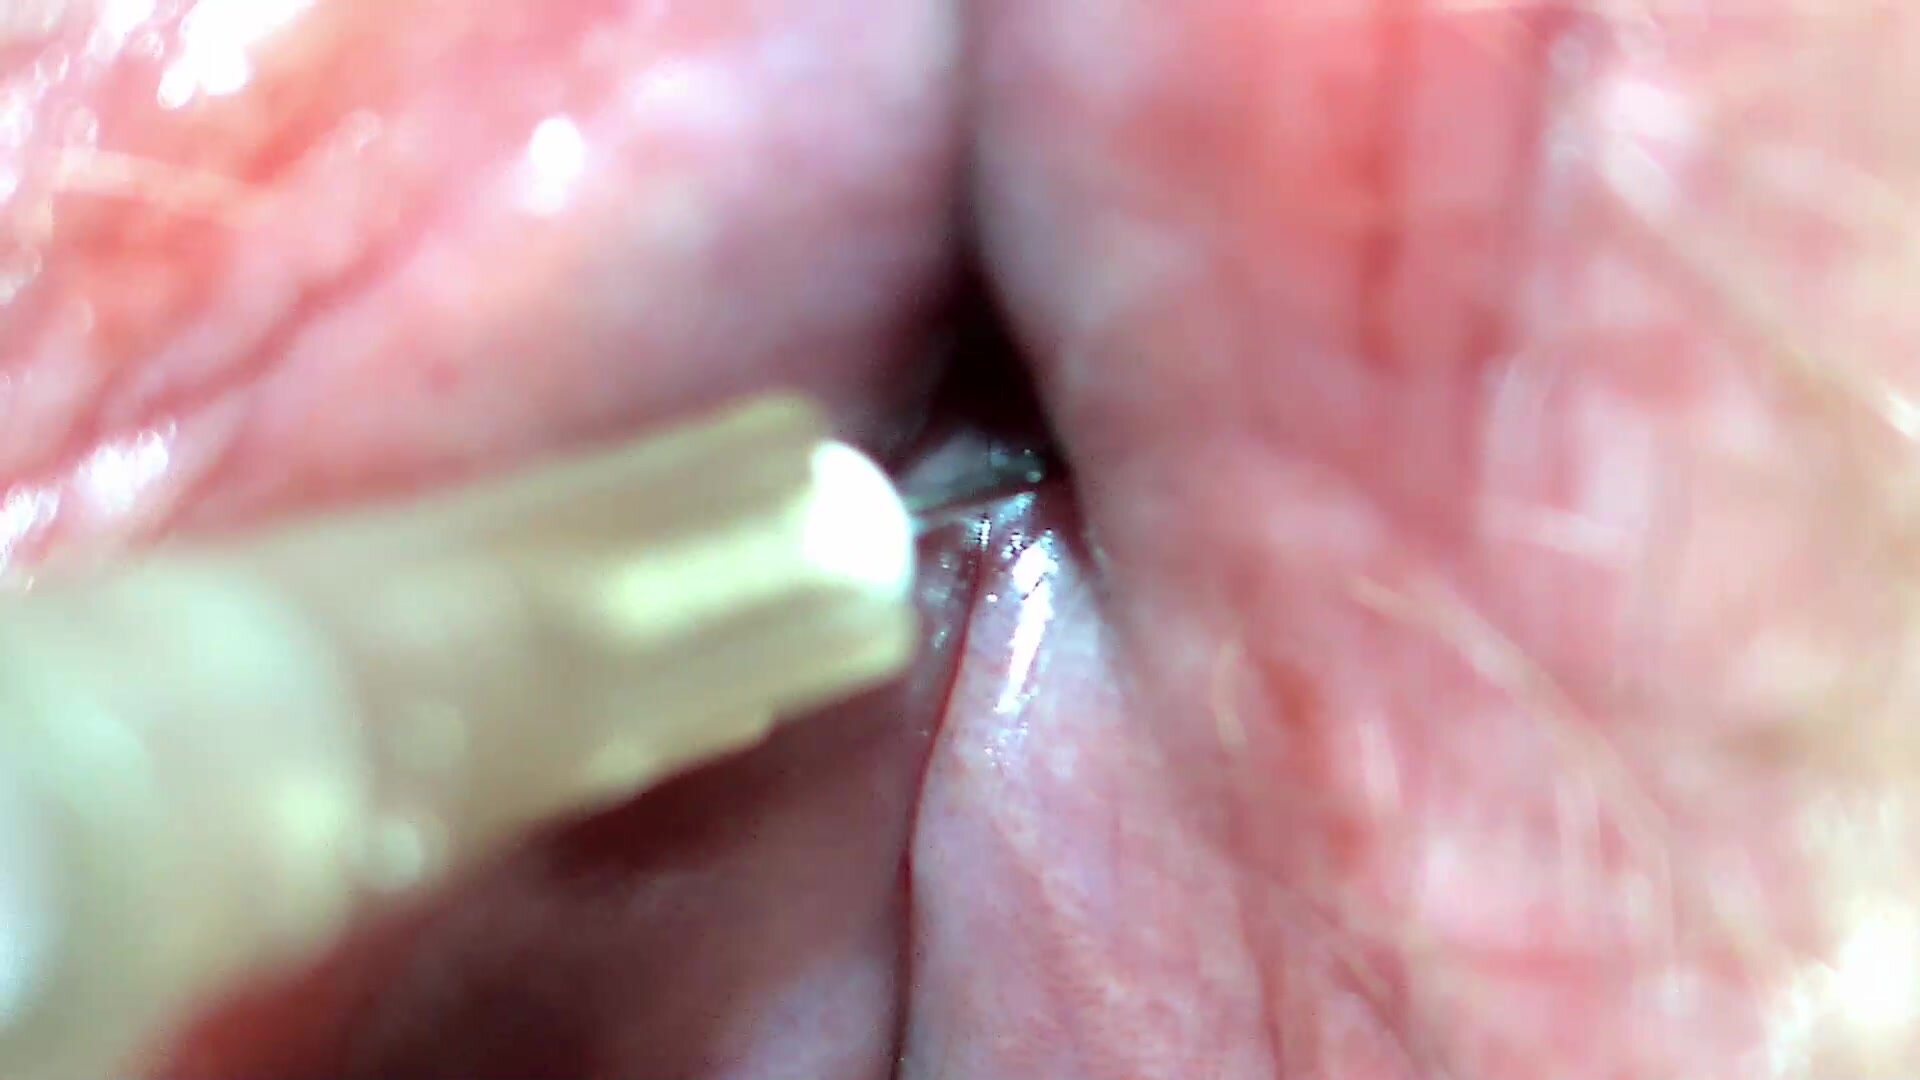 Injection in Anus with short needle (Extreme Closeup)